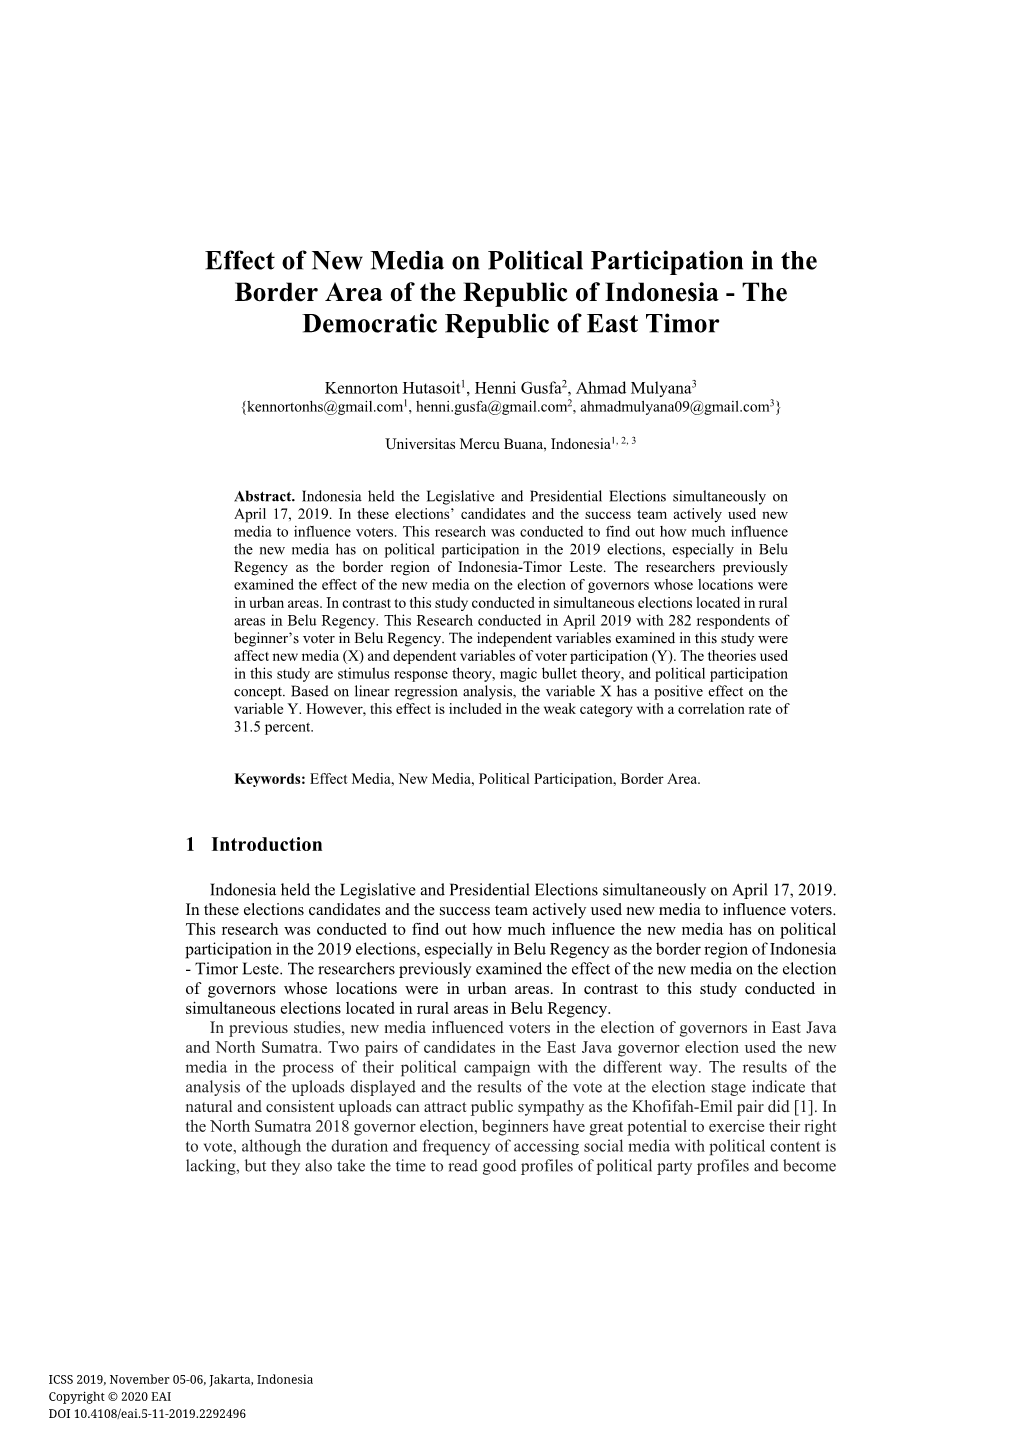 Effect of New Media on Political Participation in the Border Area of the Republic of Indonesia - the Democratic Republic of East Timor